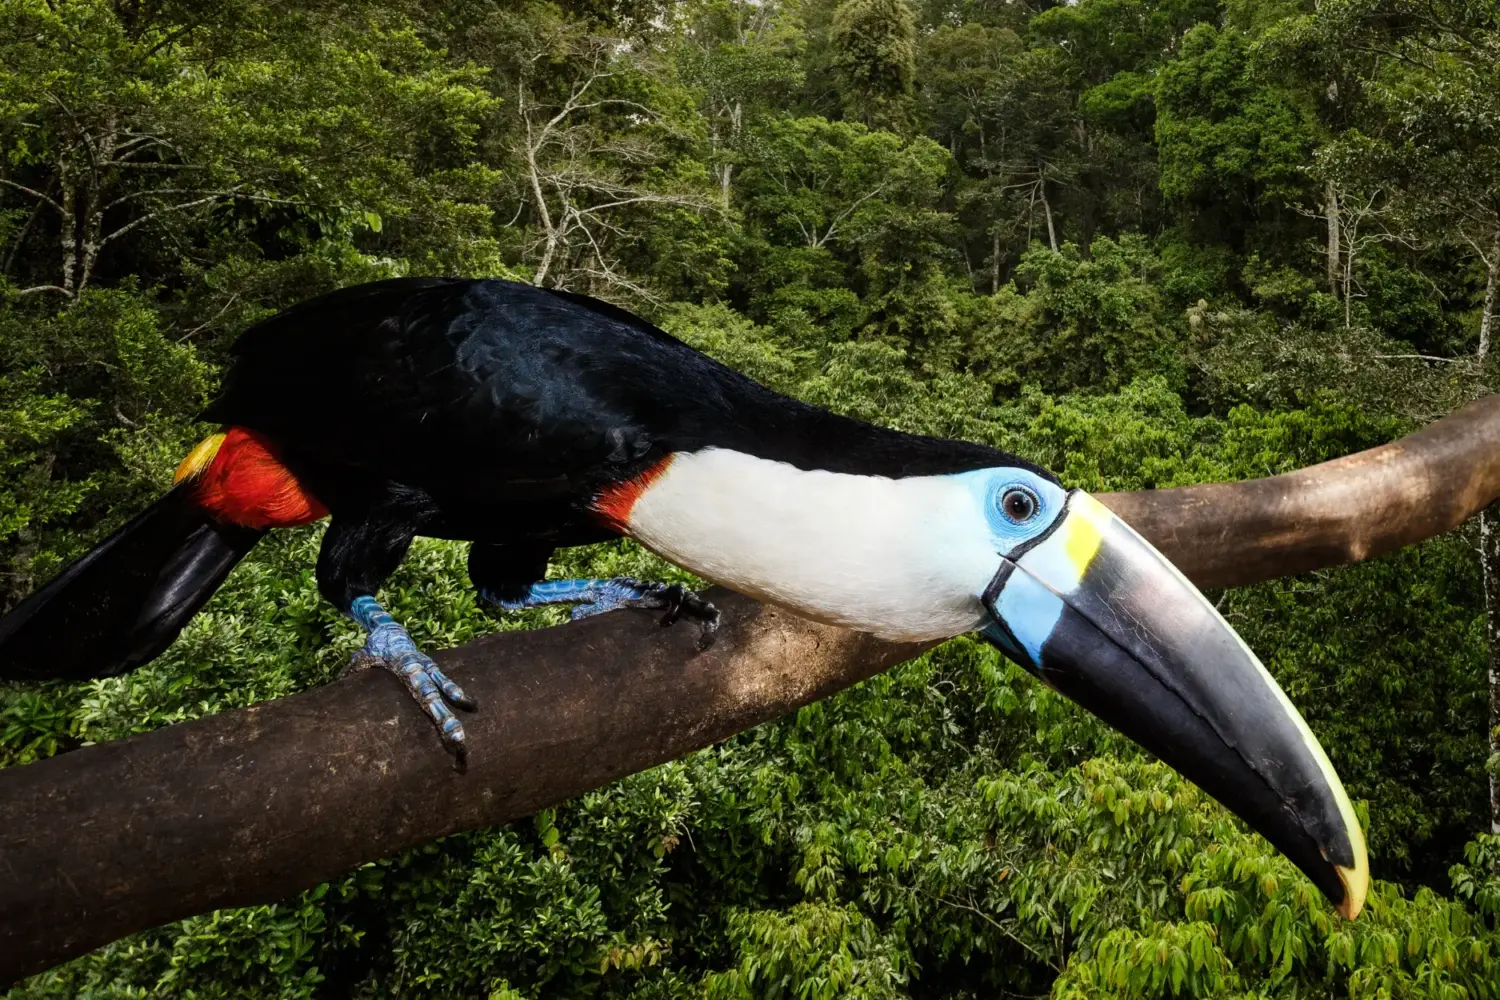 white_chested_toucan